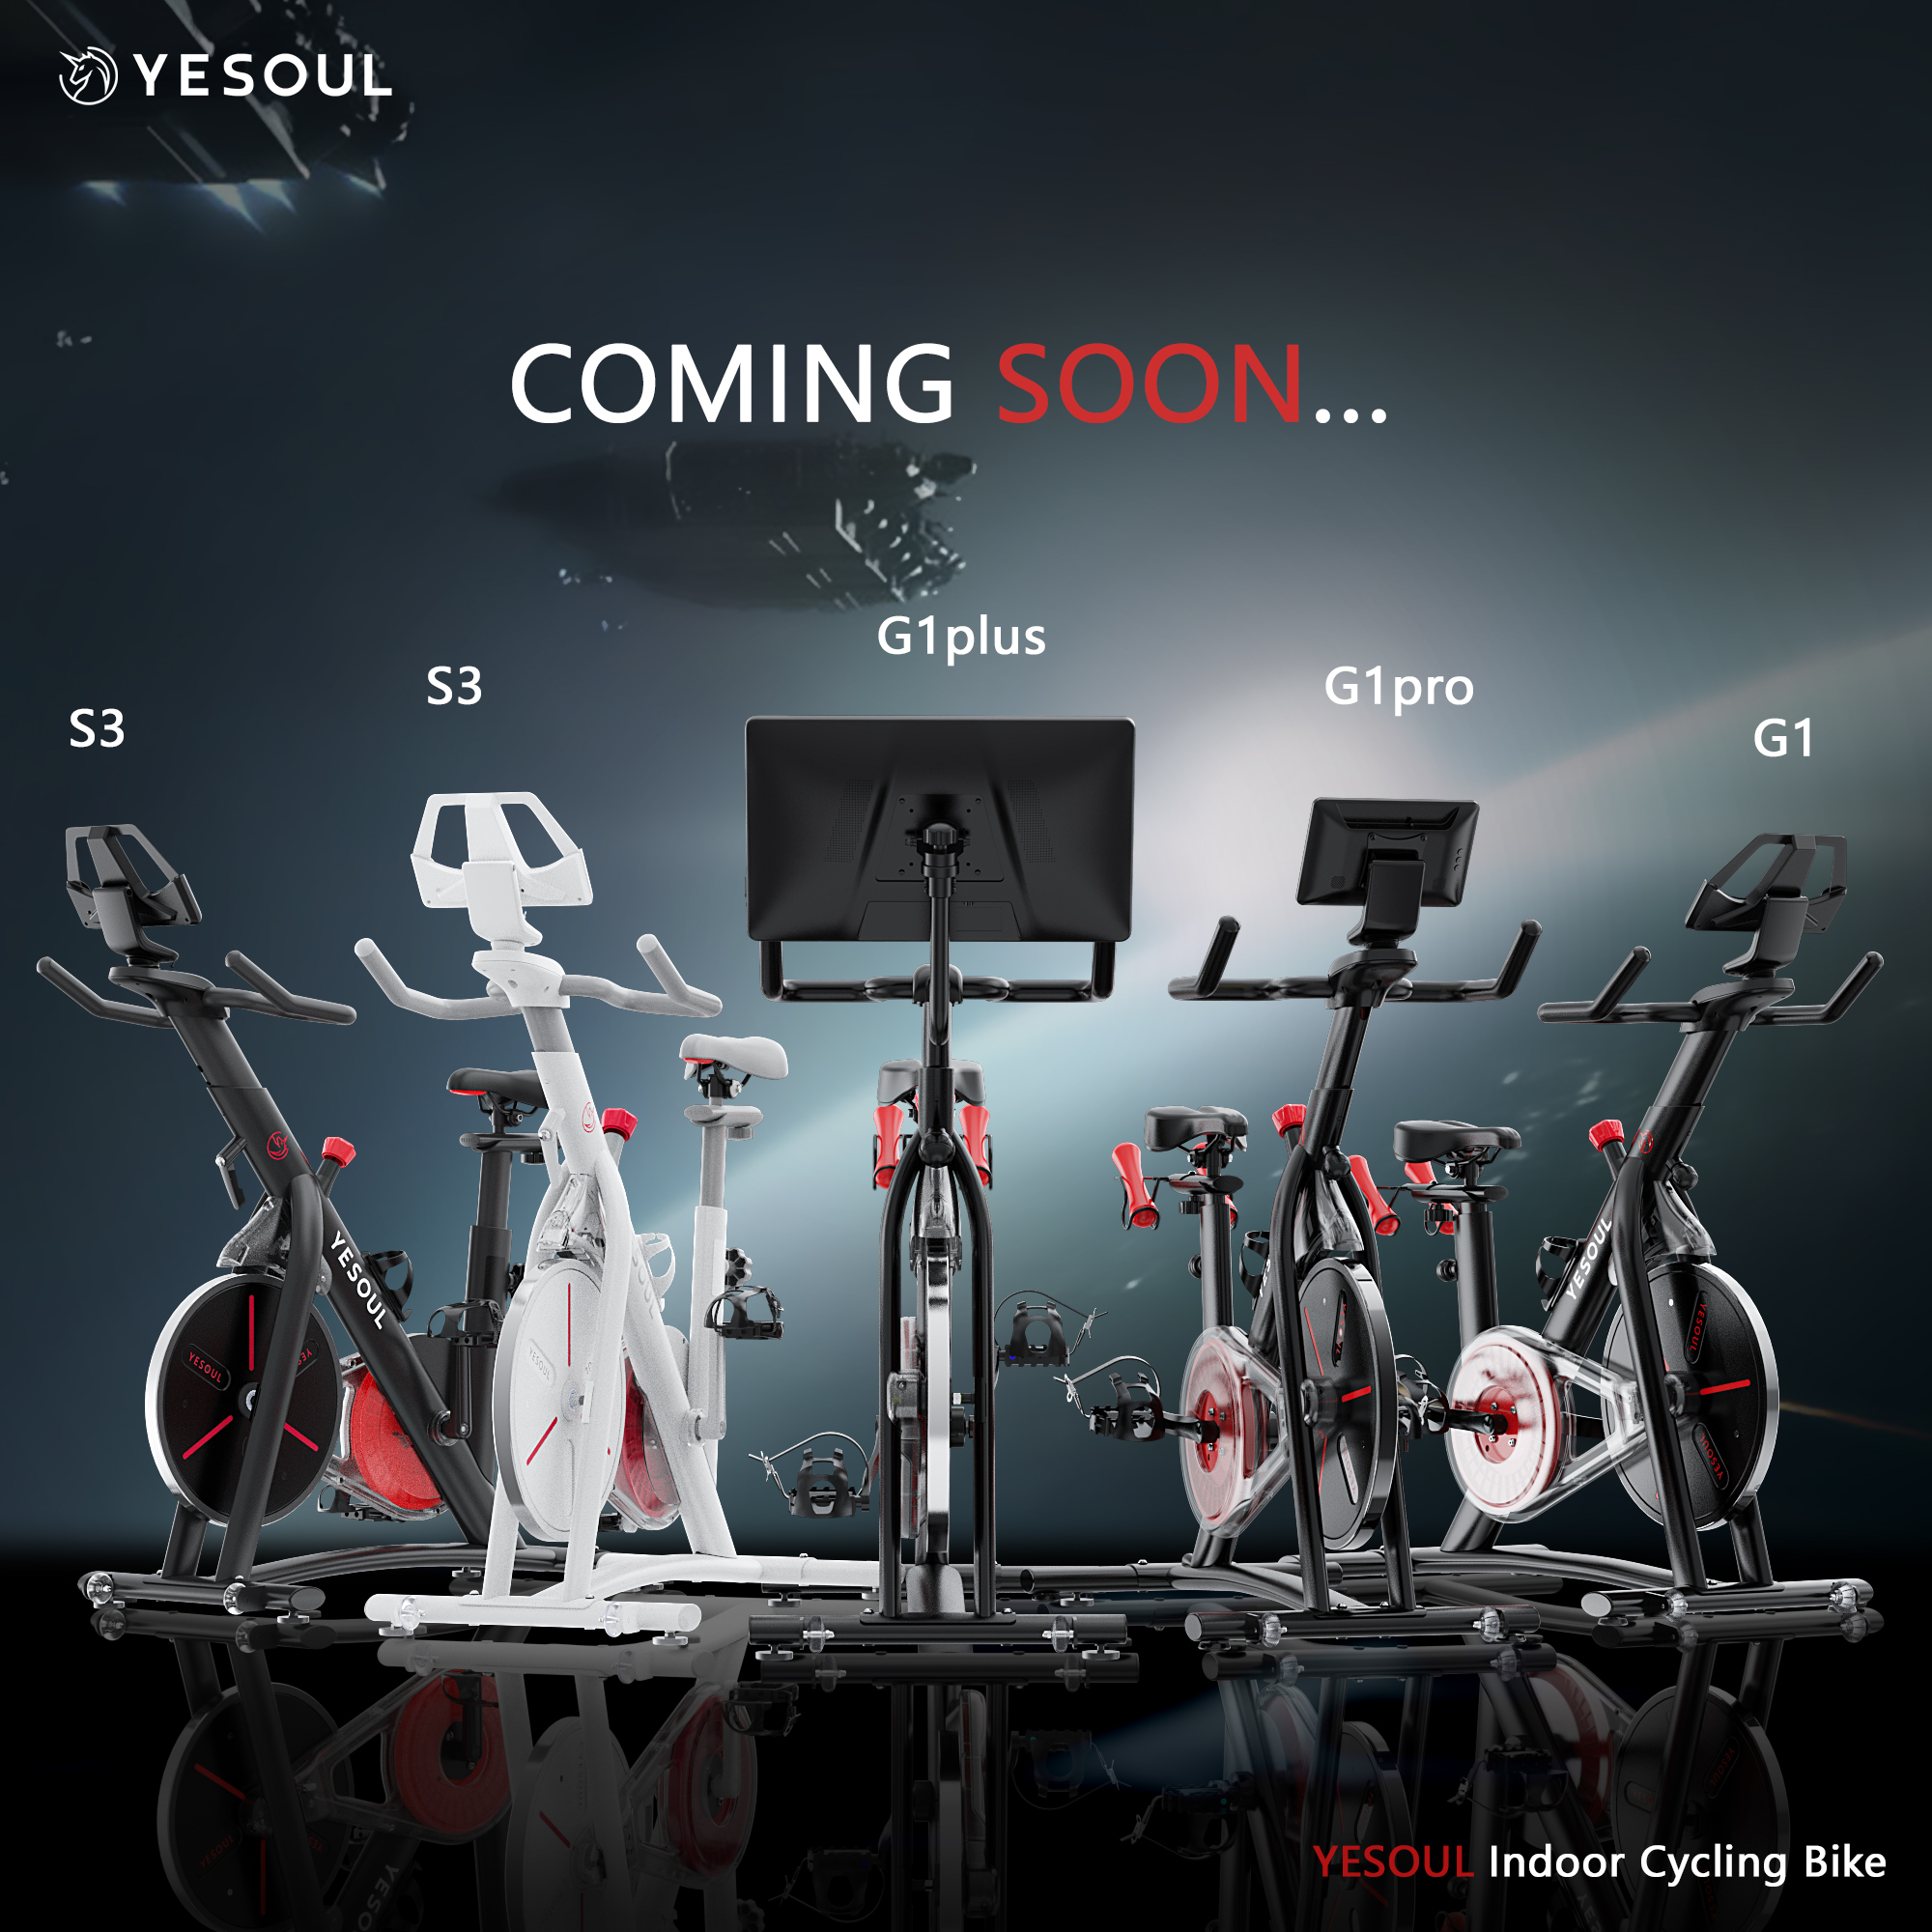 YESOUL Takes Home Fitness To New Heights With New Smart Indoor Cycling Bike